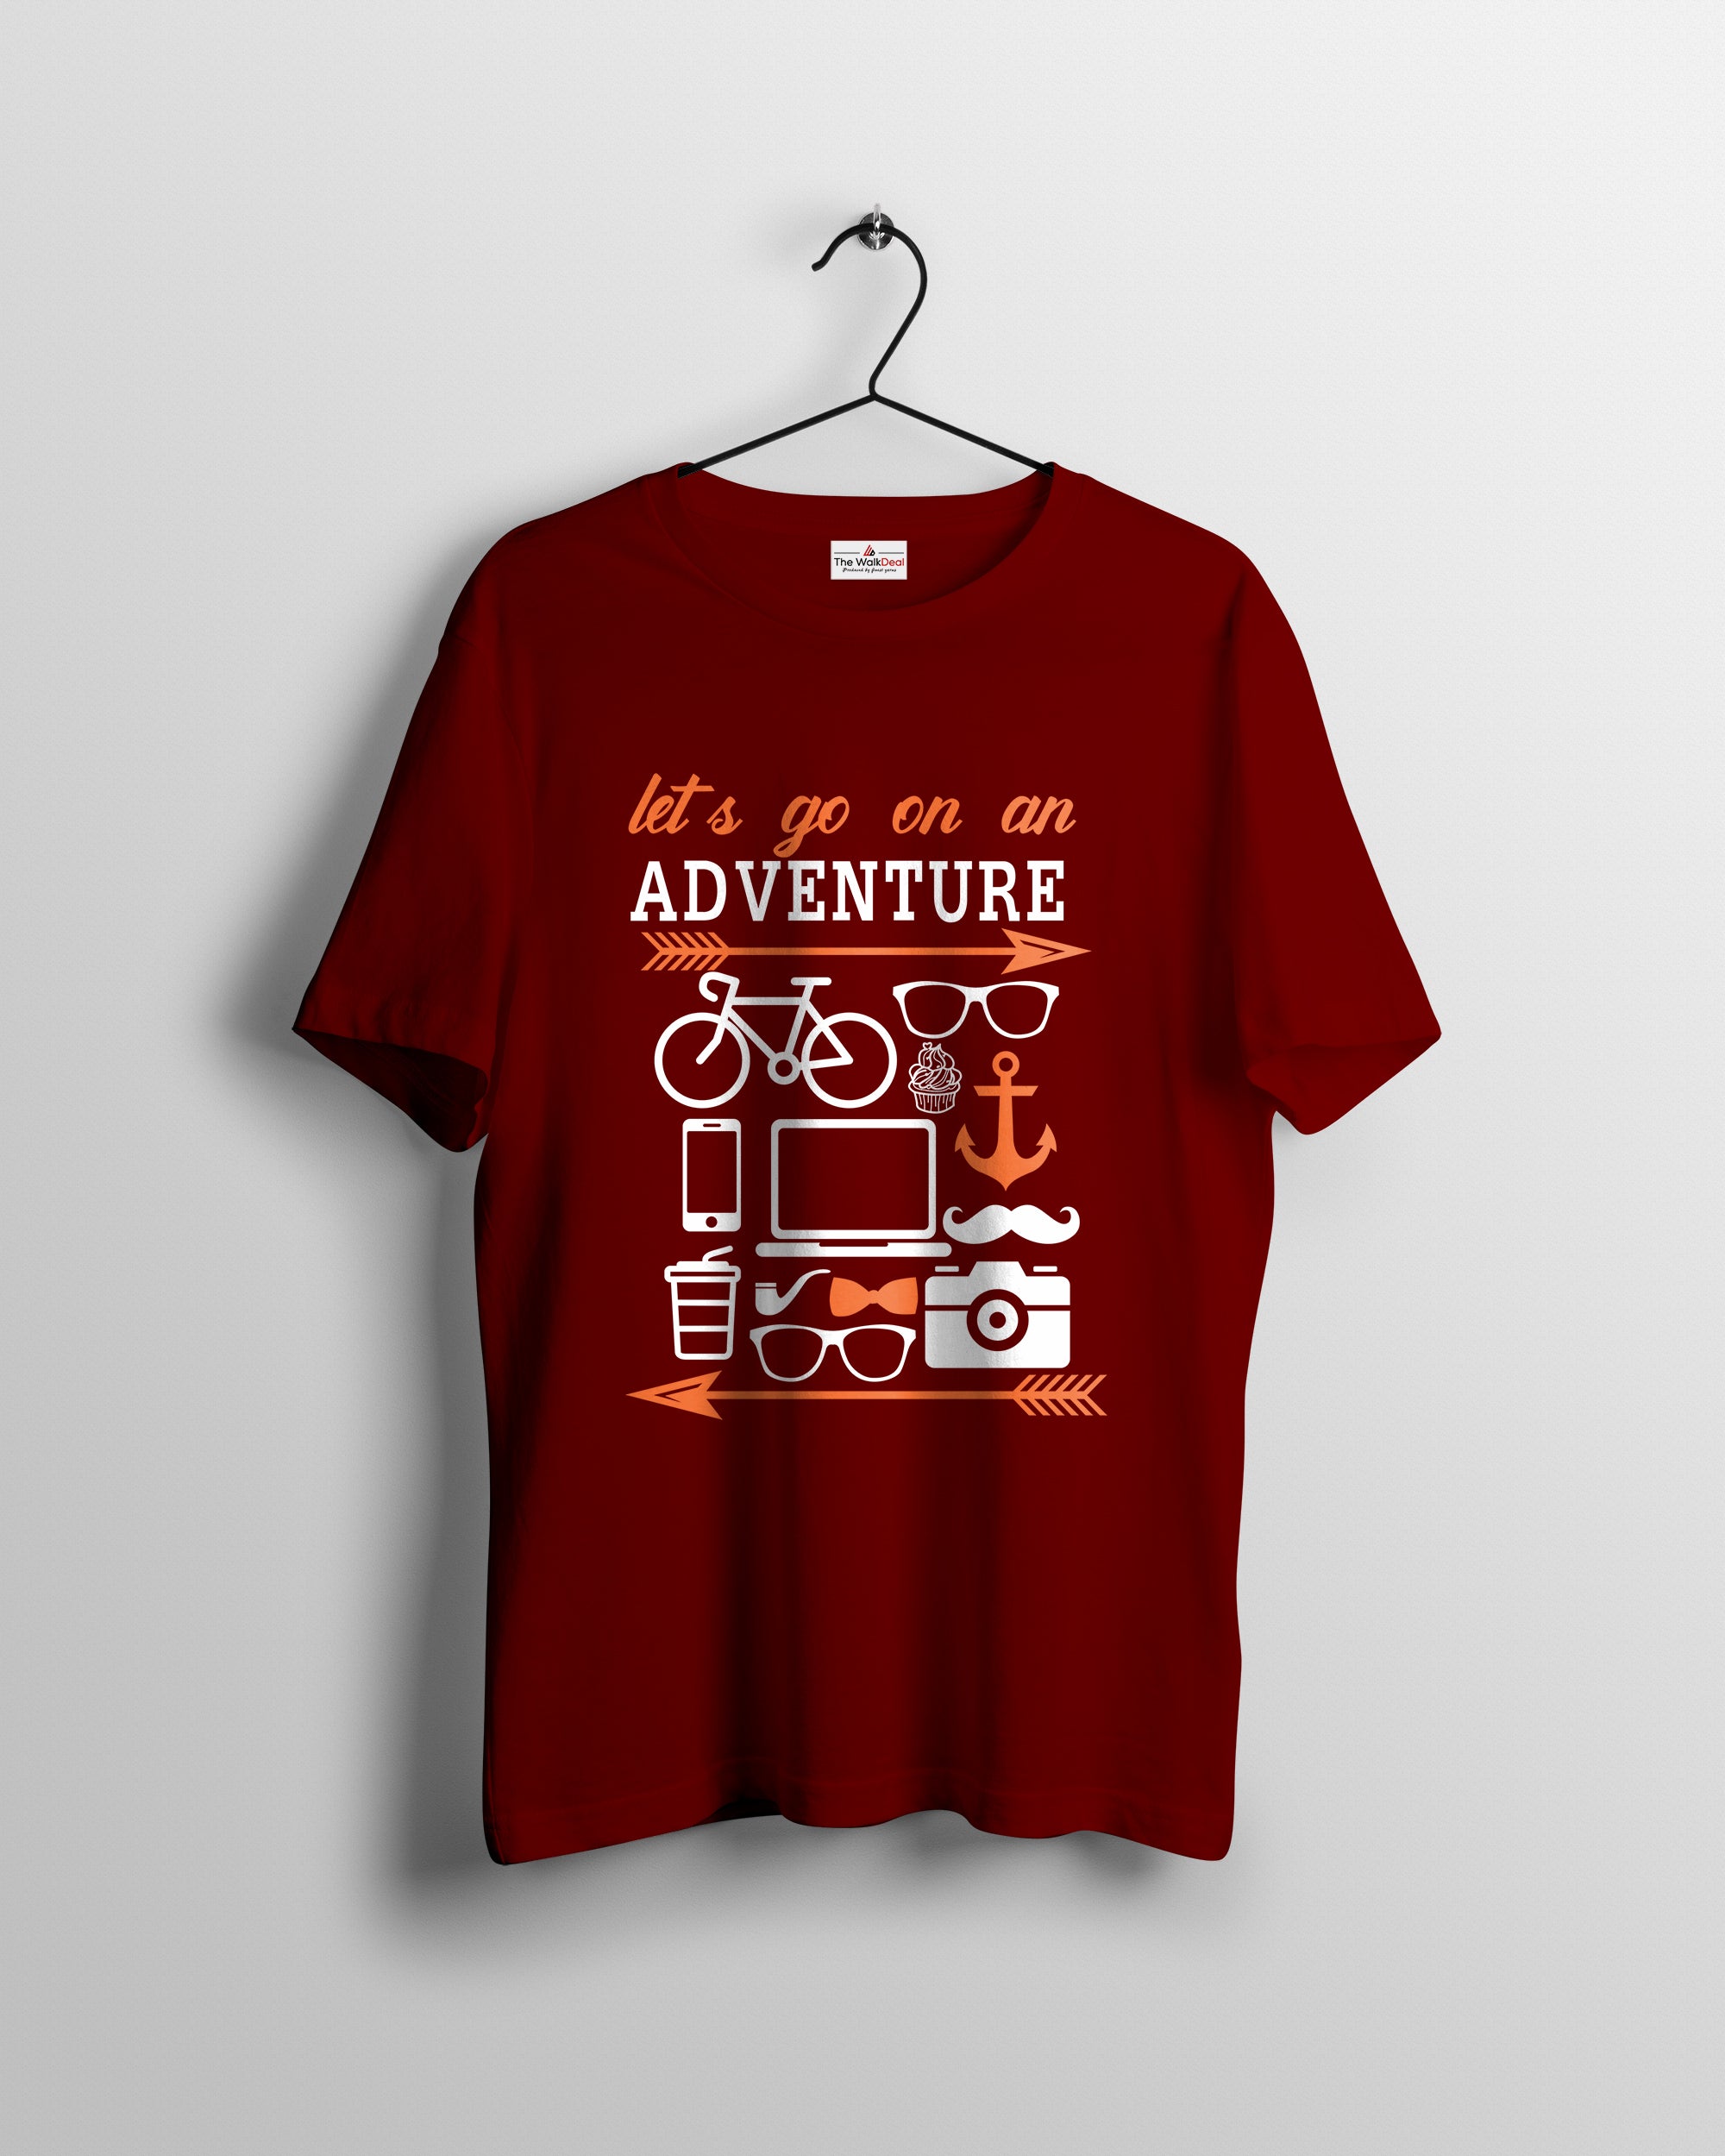 Let's_Go_Adv T-Shirts For Men || Maroon || Stylish Tshirts || 100% Cotton || Best T-Shirt For Men's